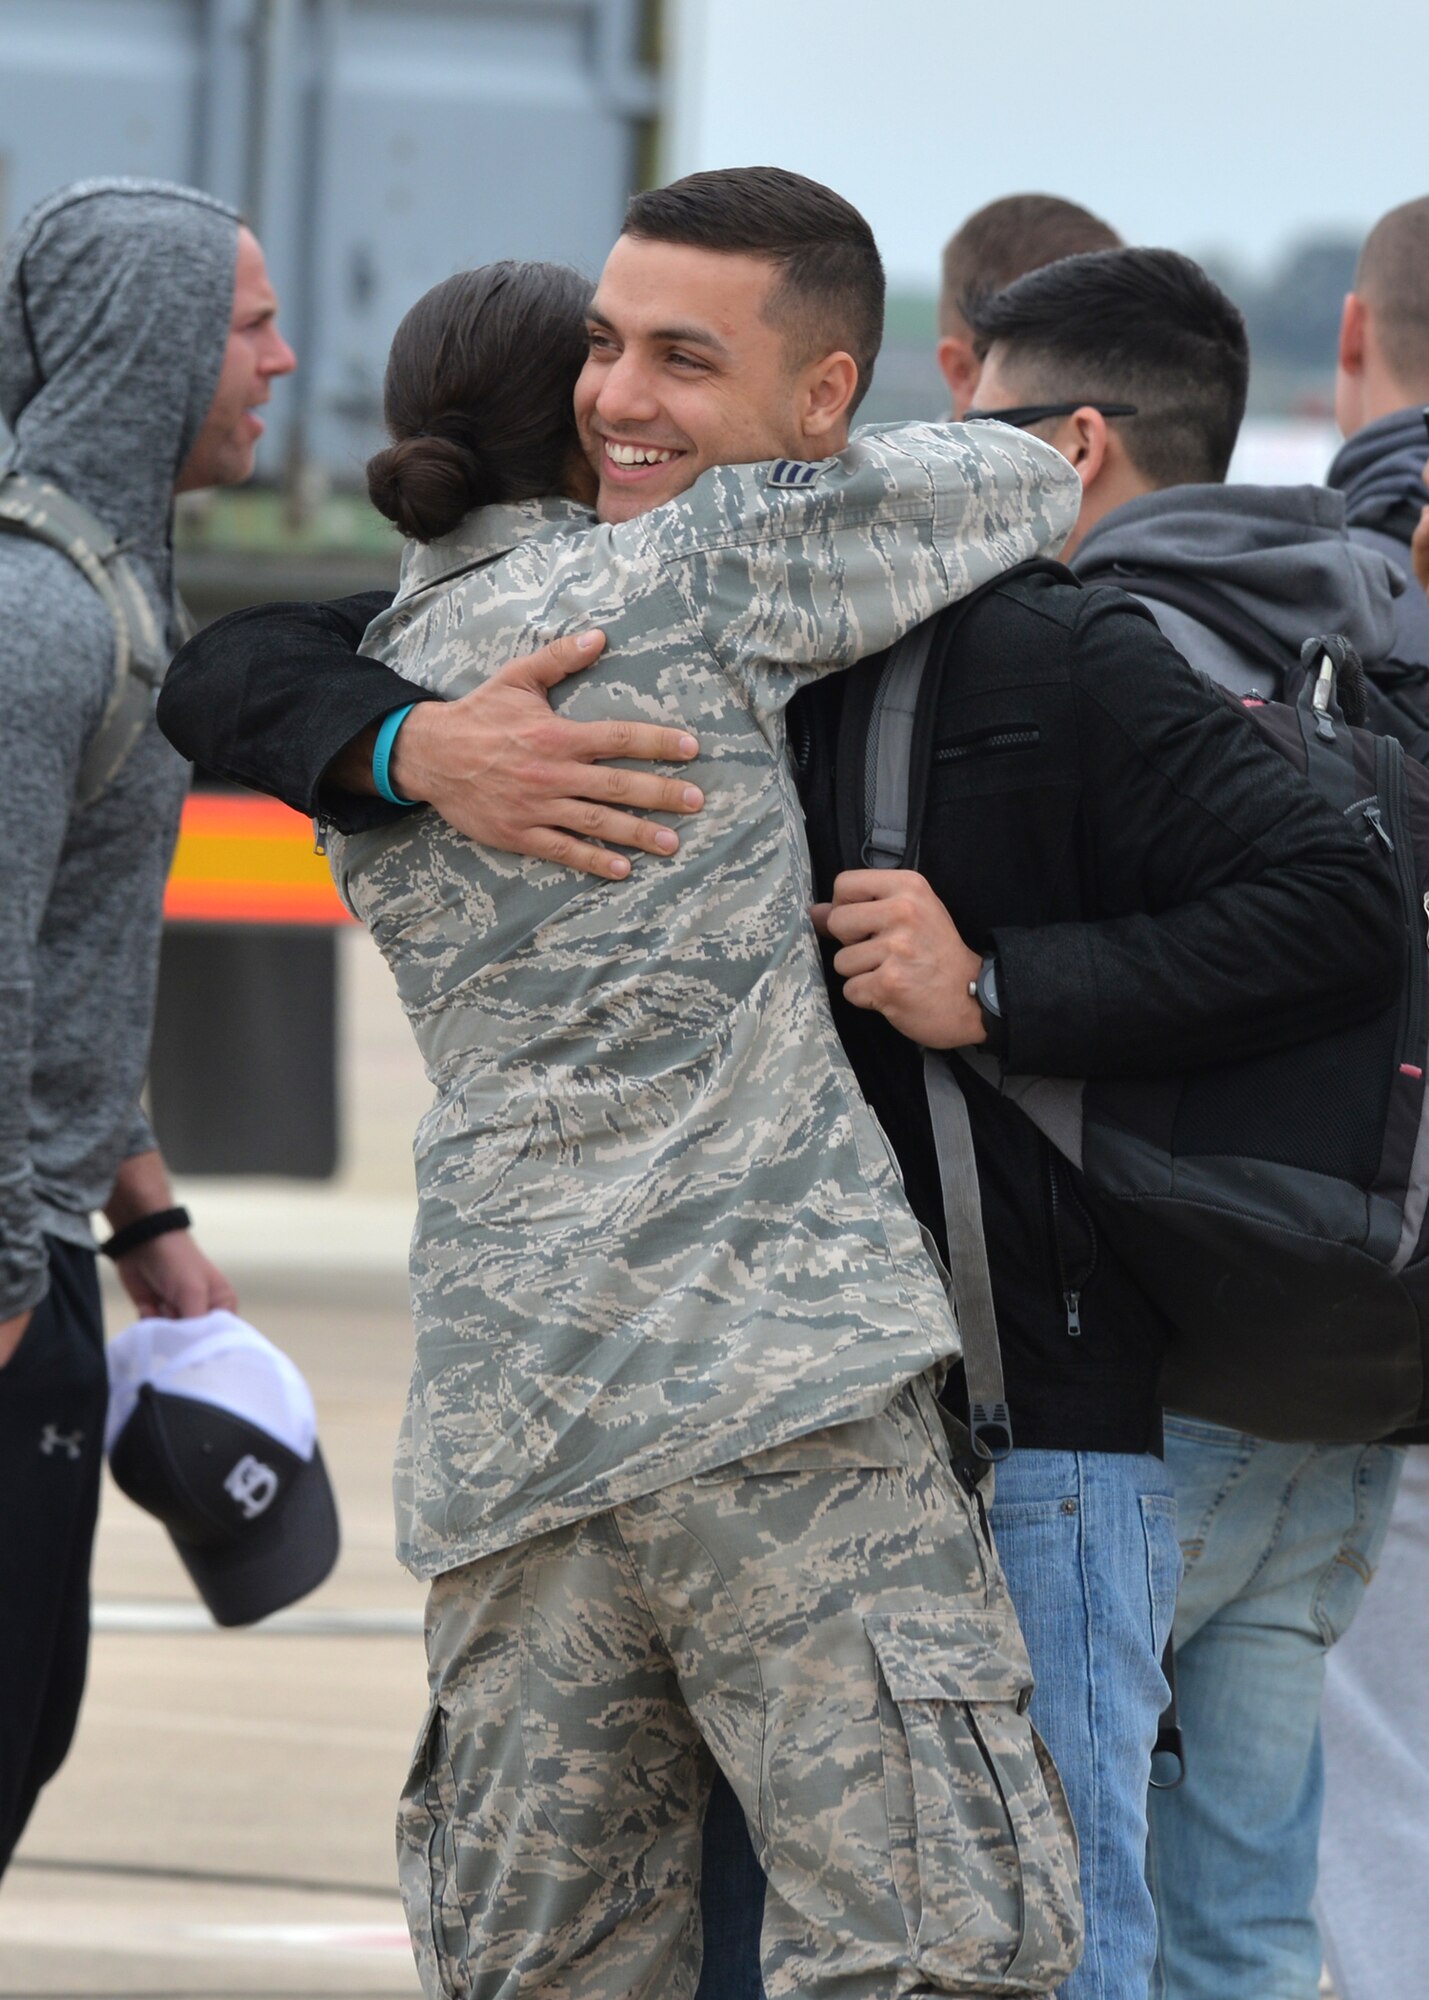 Main-body personnel from Barksdale Air Force Base, La., receive a warm welcome from advance-party Airmen upon their arrival at Morón Air Base, Spain, Feb. 26, 2016. These Airmen will be assigned to the 2nd Expeditionary Bomb Group for the duration of Cold Response 16, a large-scale NATO military training exercise. Approximately 16,000 troops from a dozen allied nations are scheduled to participate in the biennial exercise.